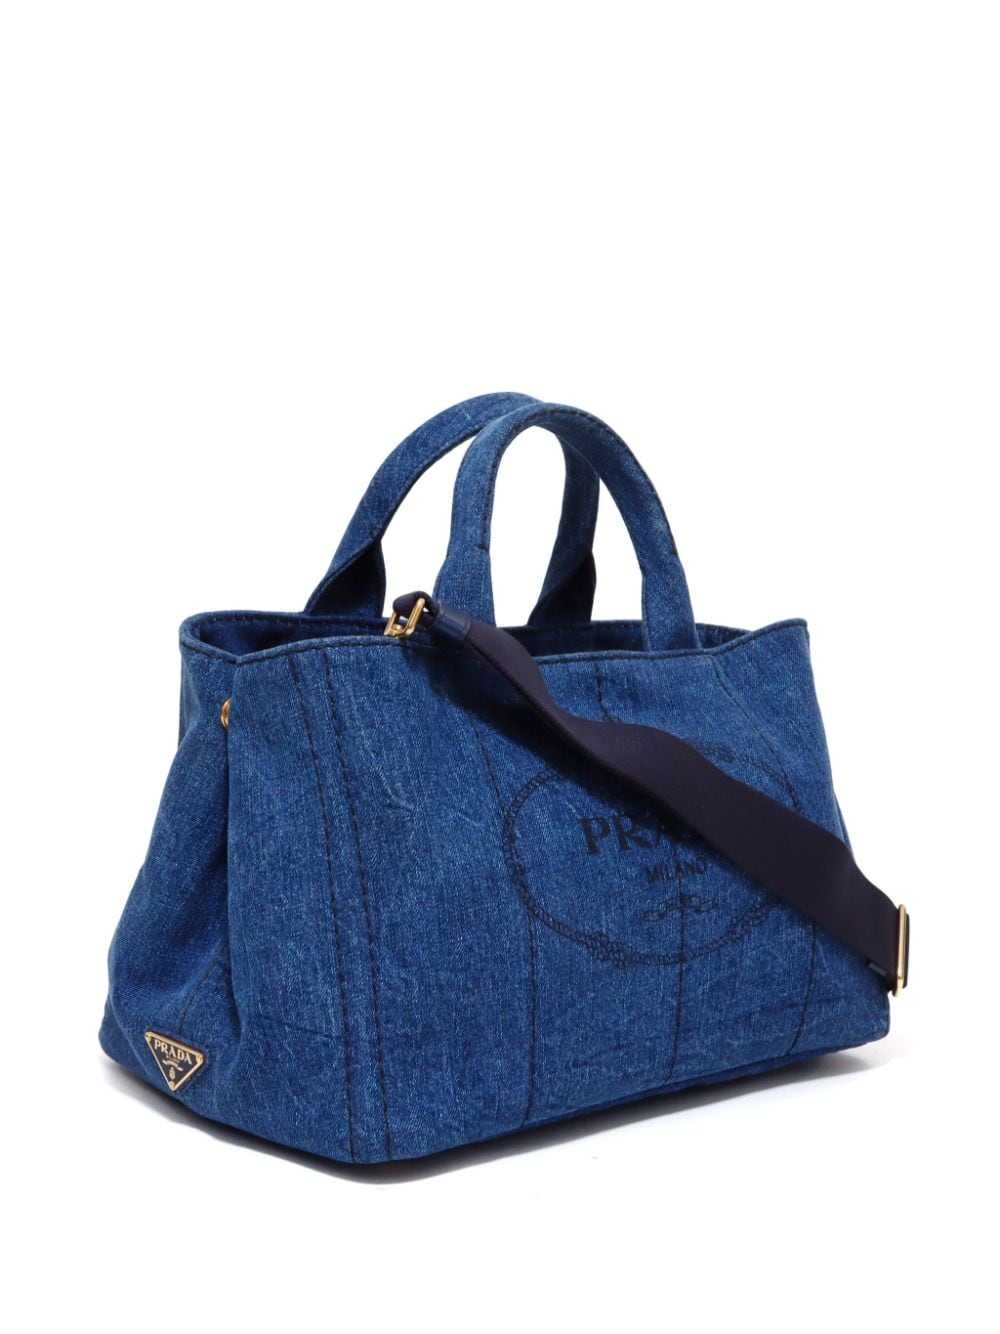 Prada Pre-Owned 2000s Canapa two-way bag - Blue - image 3